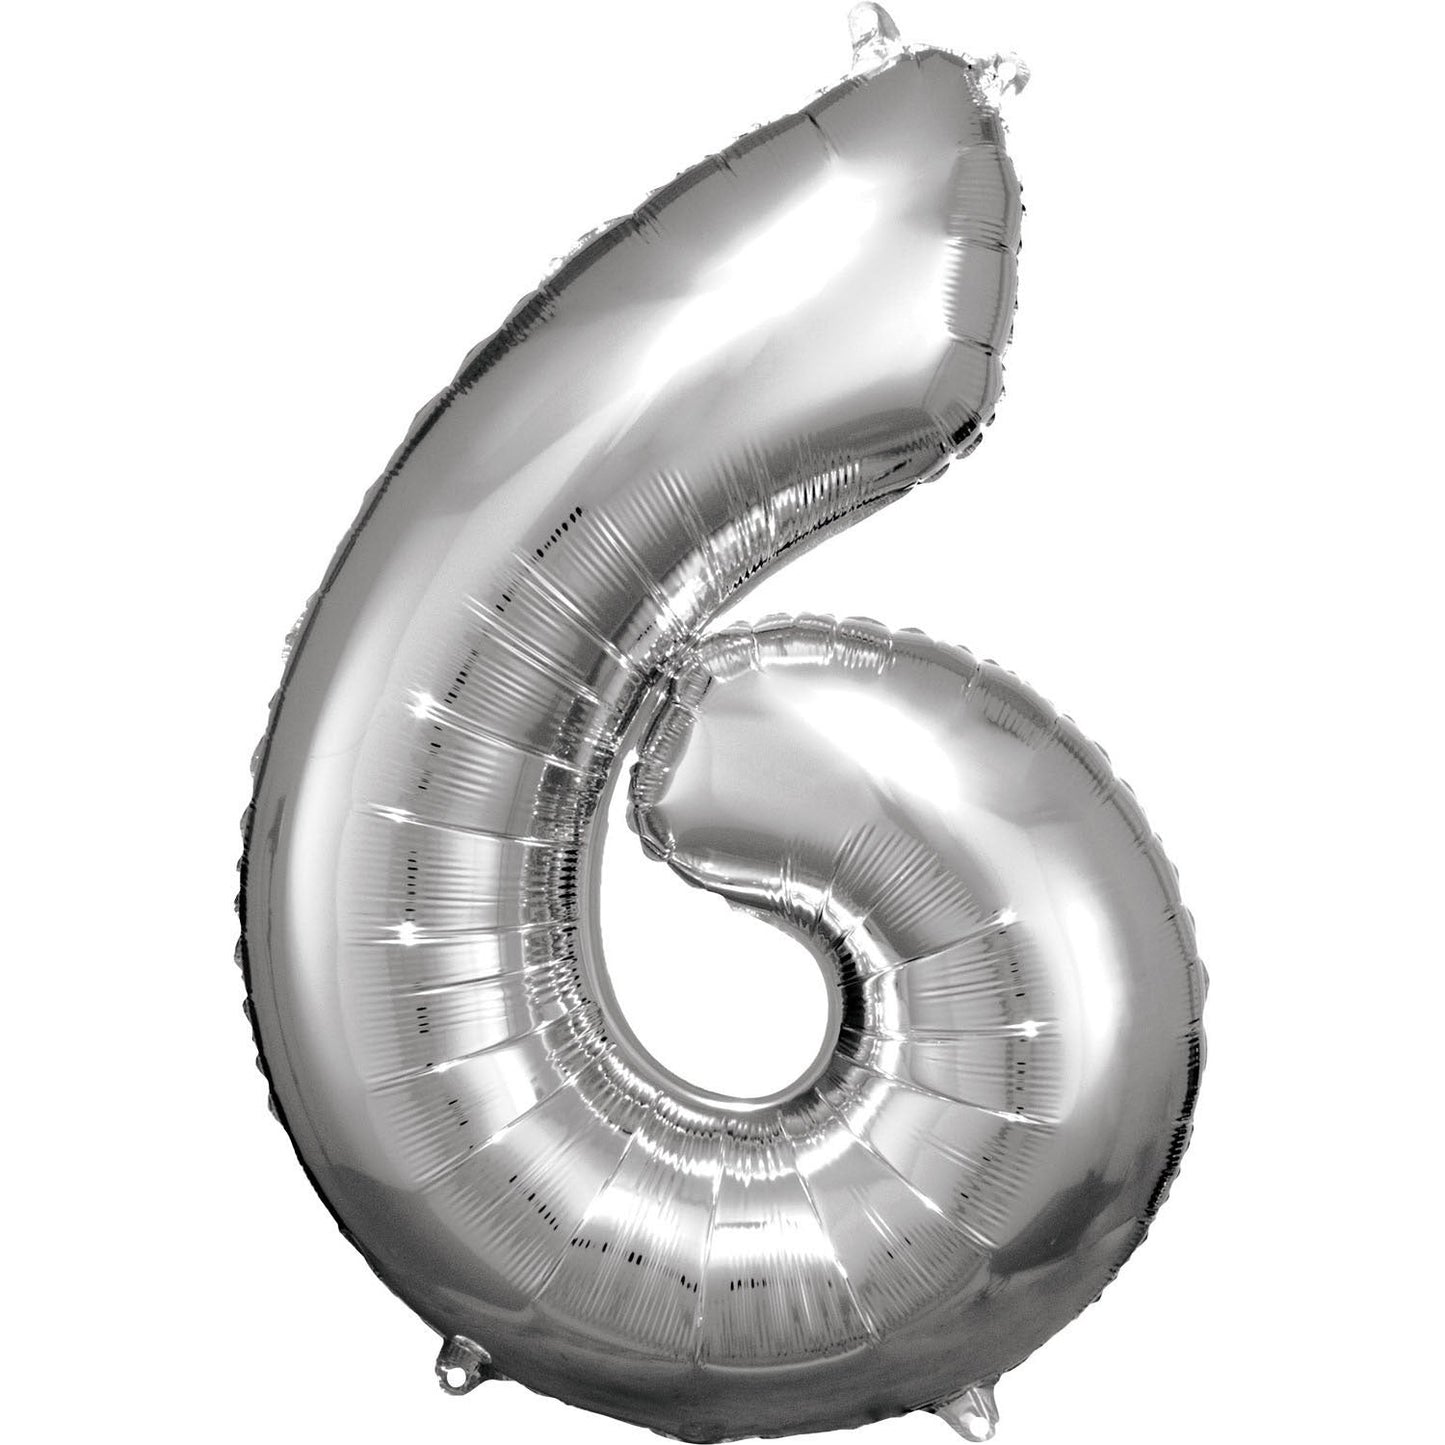 Silver Supershape Number 6 Foil Balloon 88cm (34in) height by 55cm (21in) width Balloon is sold uninflated. Can be inflated with air or helium.